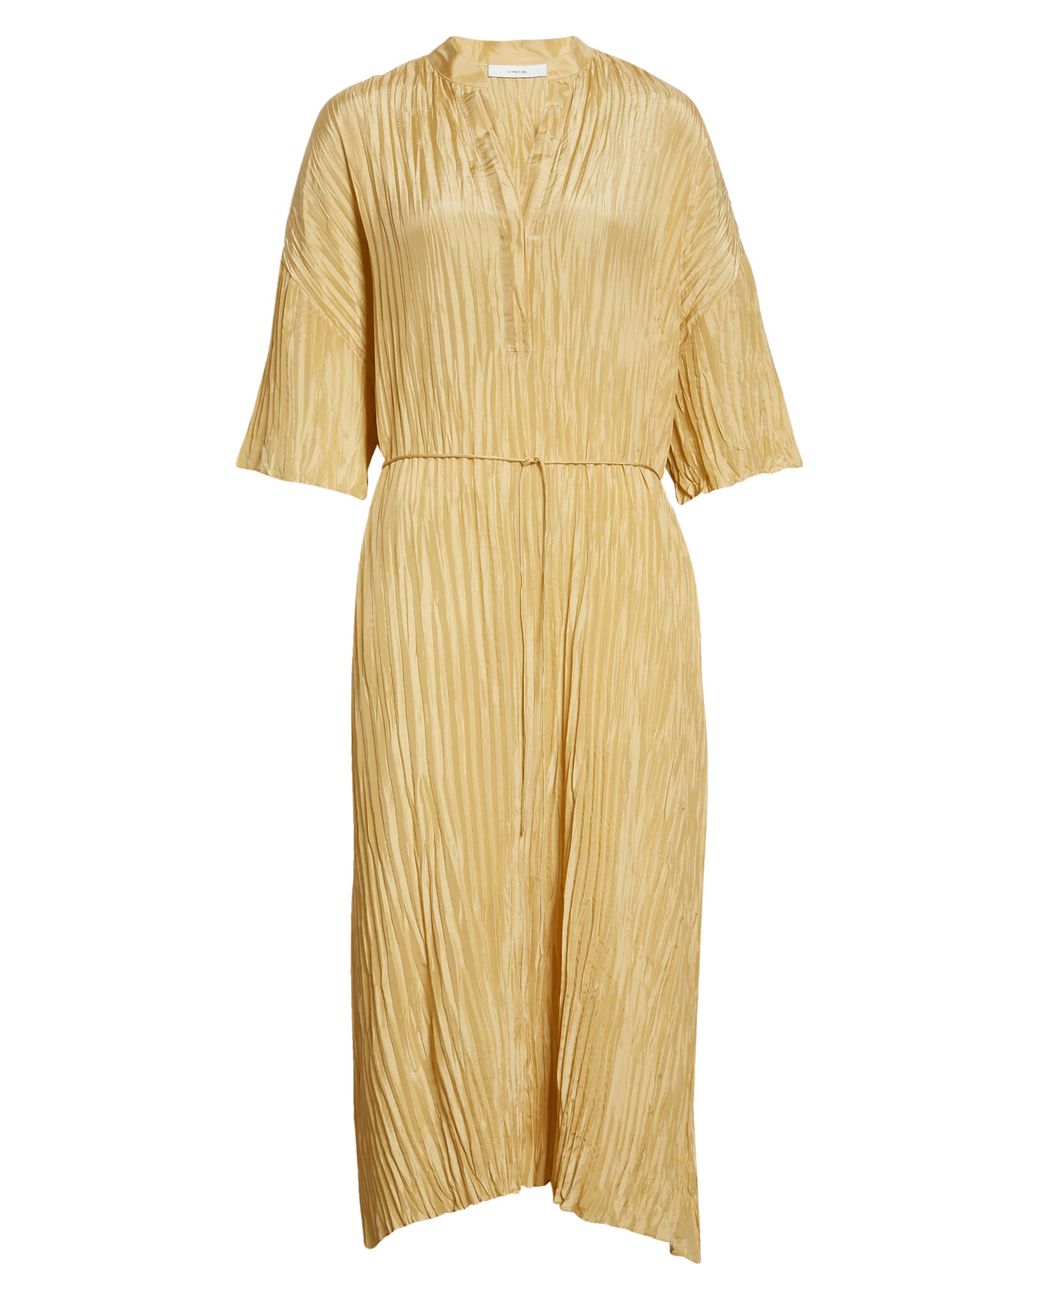 Vince Crushed Satin Dress in Yellow | Lyst